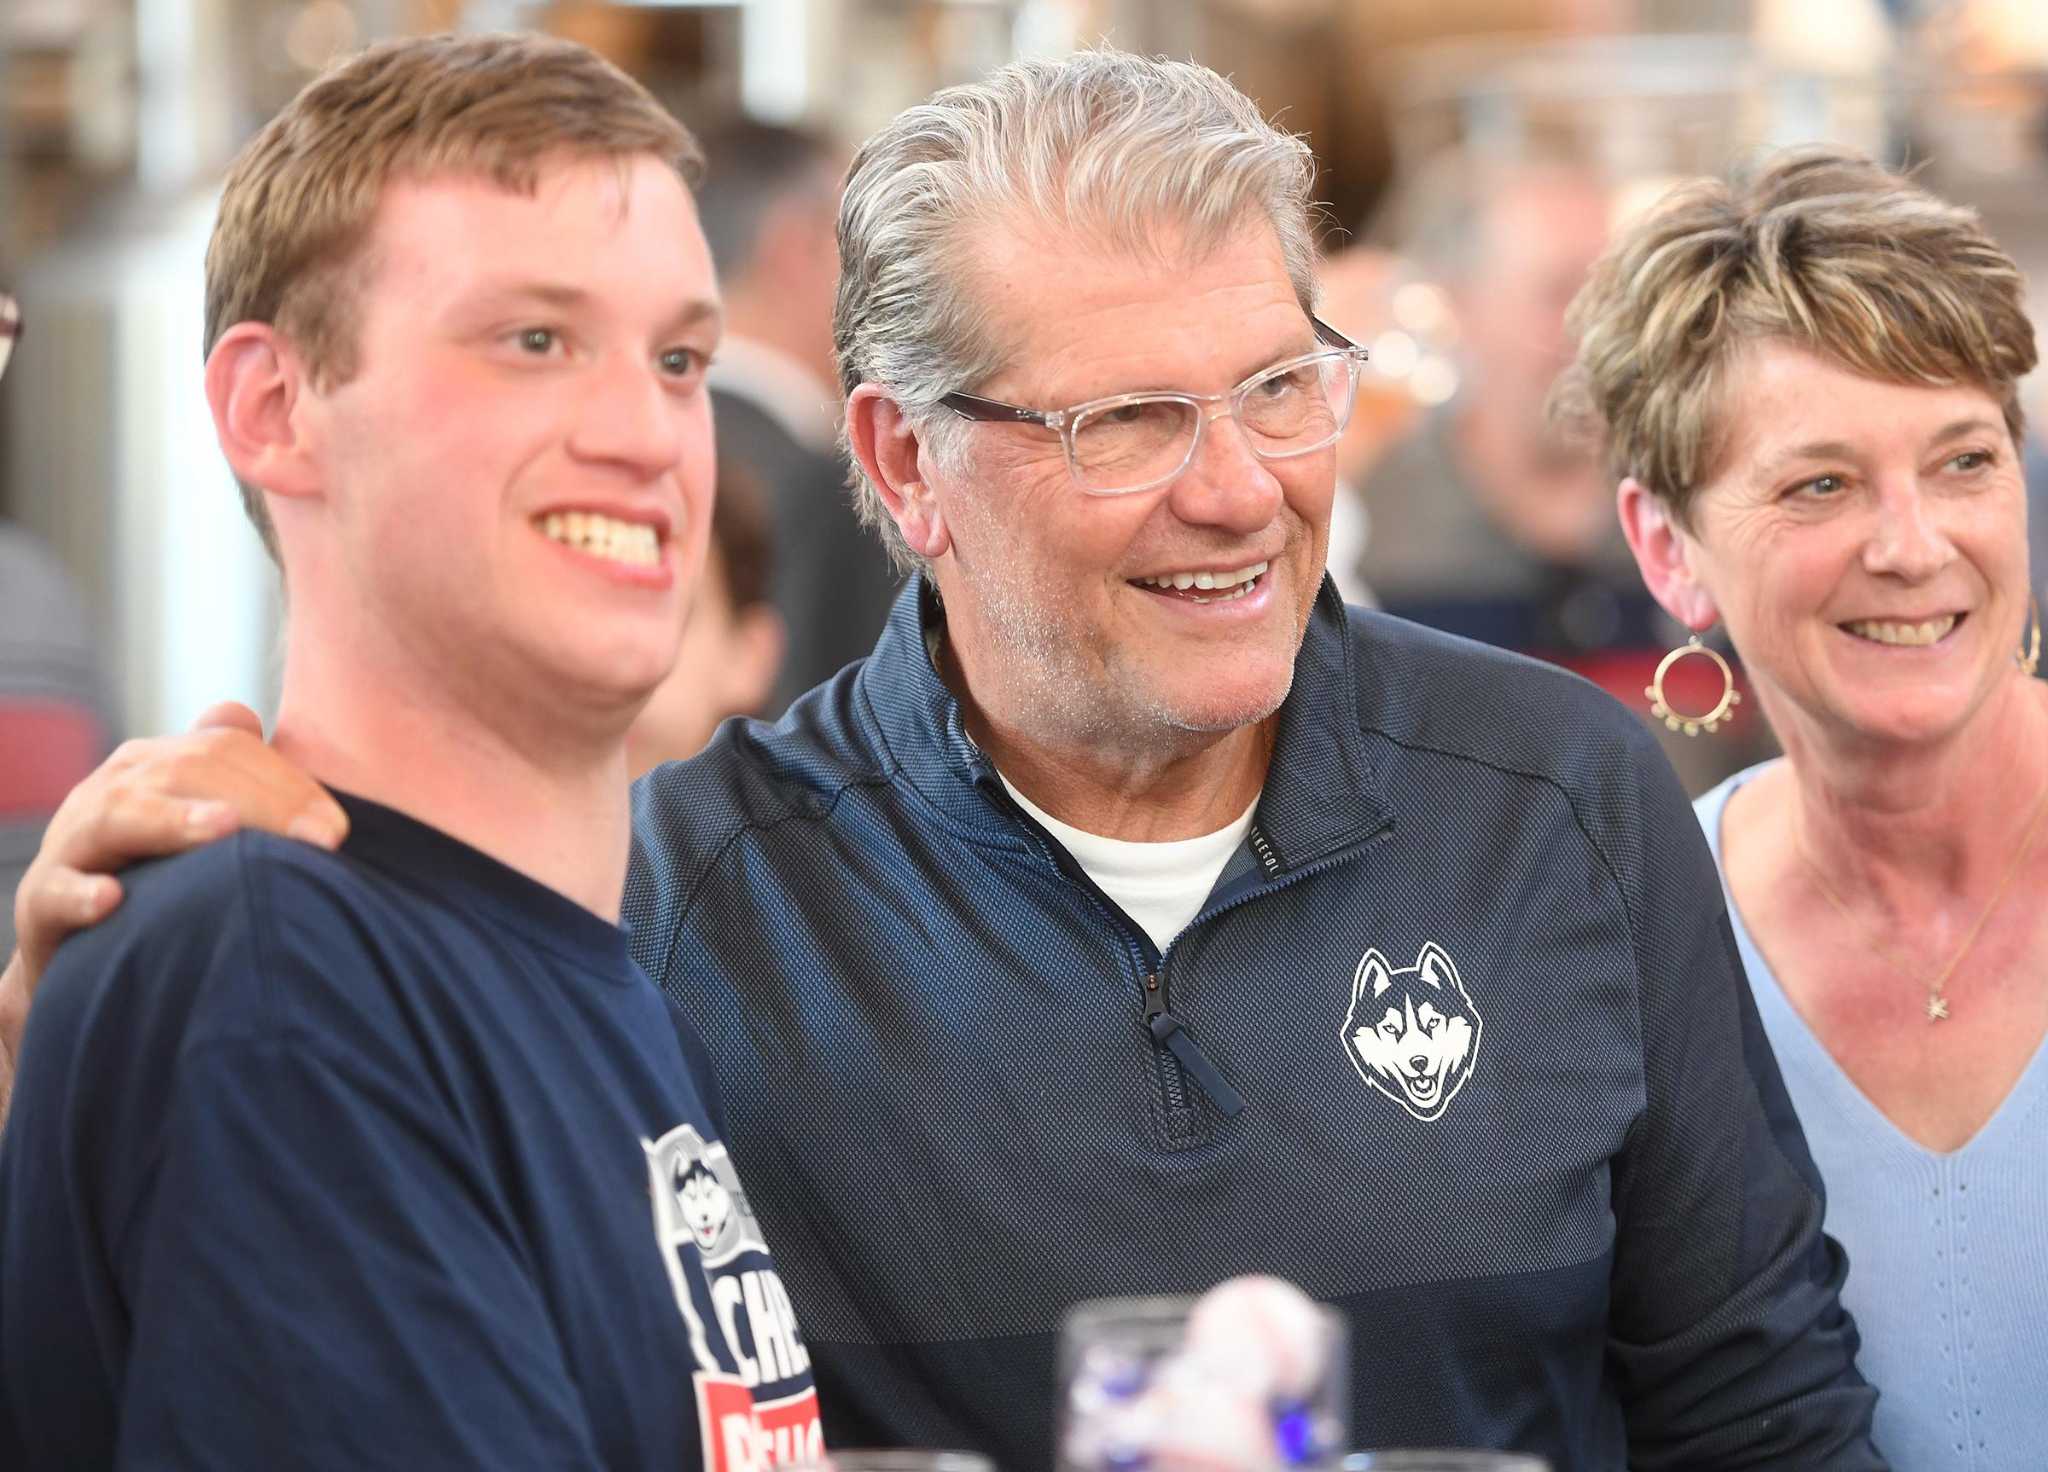 UConn Coaches Road Show returns in June. Here's where Dan Hurley, Geno Auriemma will appear